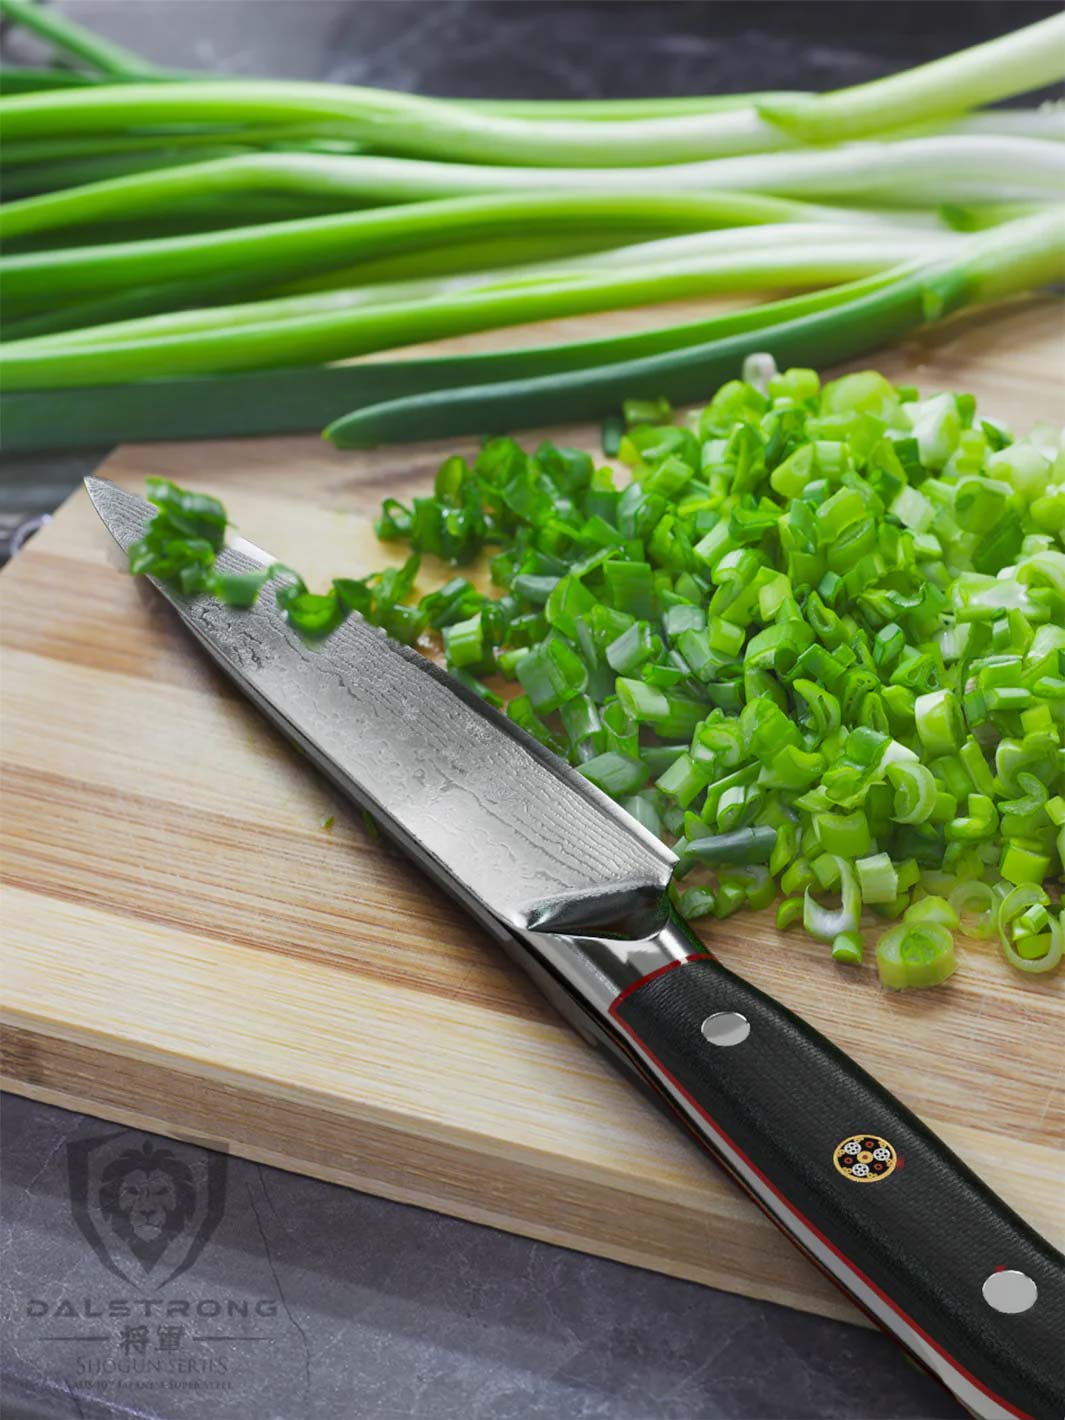 Dalstrong shogun series 6 inch utility knife with black handle and fresh scallions on a wooden board.